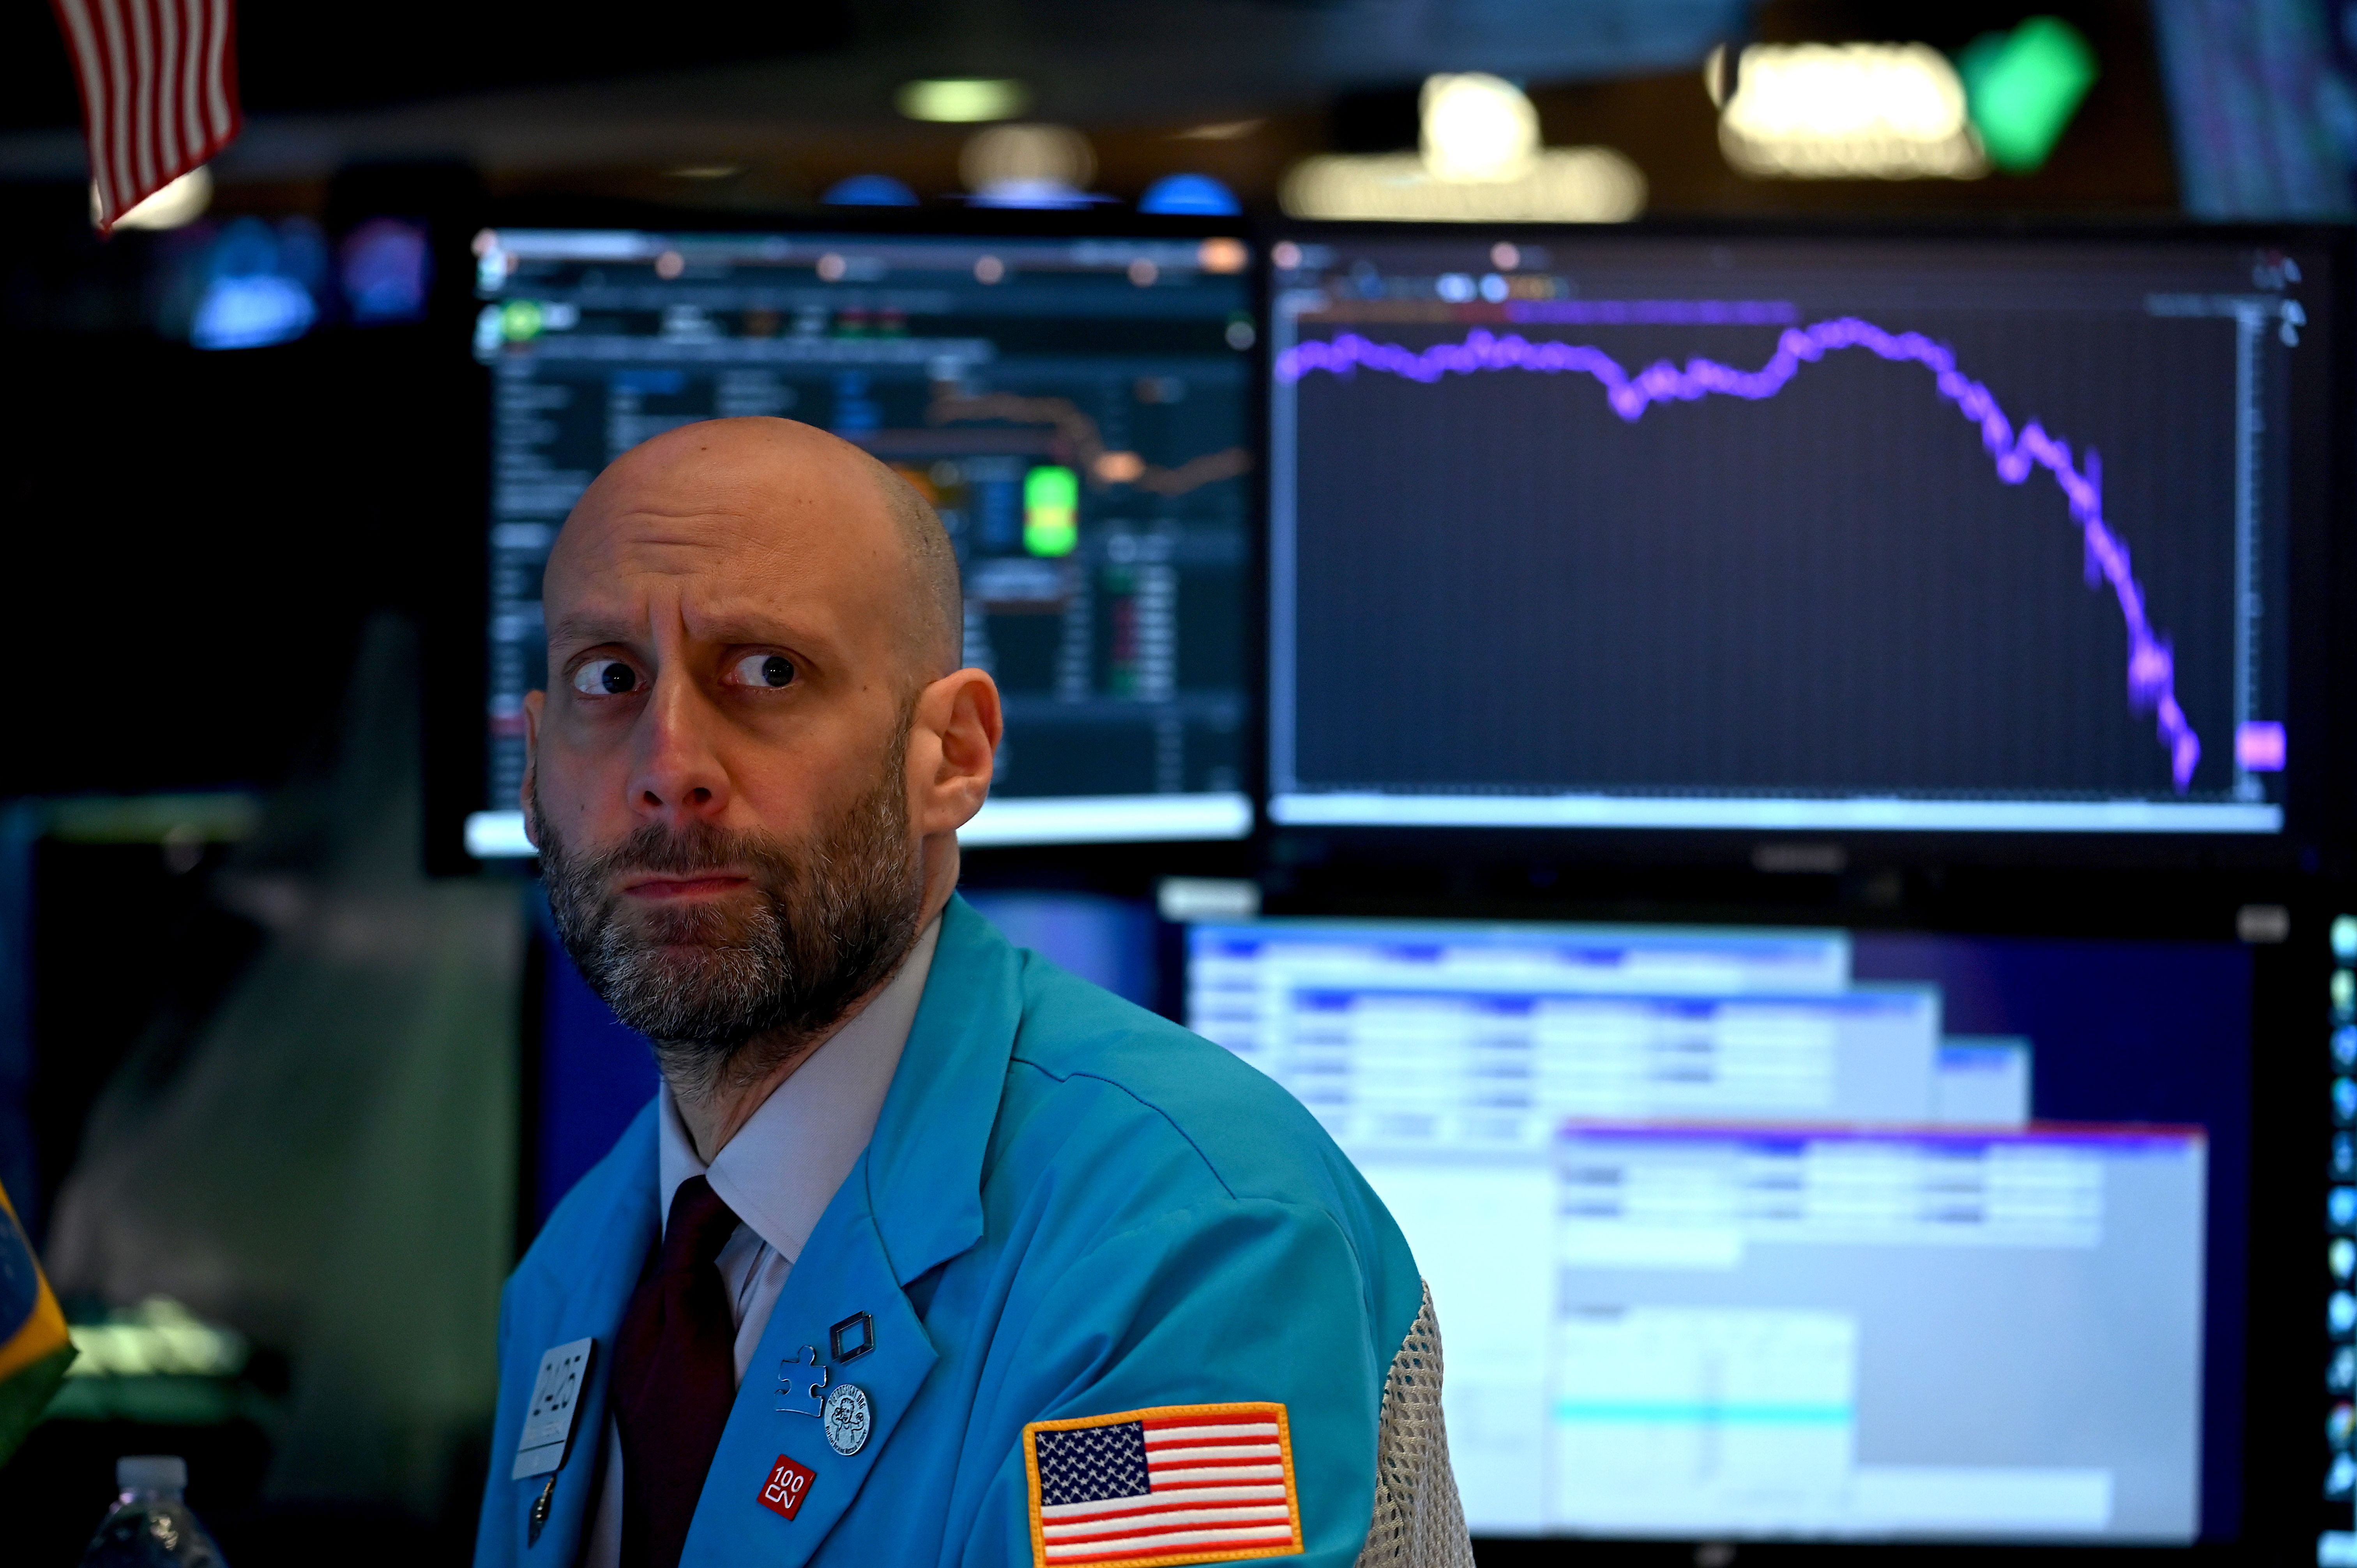 Traders work during the closing bell at the New York Stock Exchange on March 17, 2020 in New York City. The coronavirus has led to financial uncertainty, including job losses and business closures, across the globe.